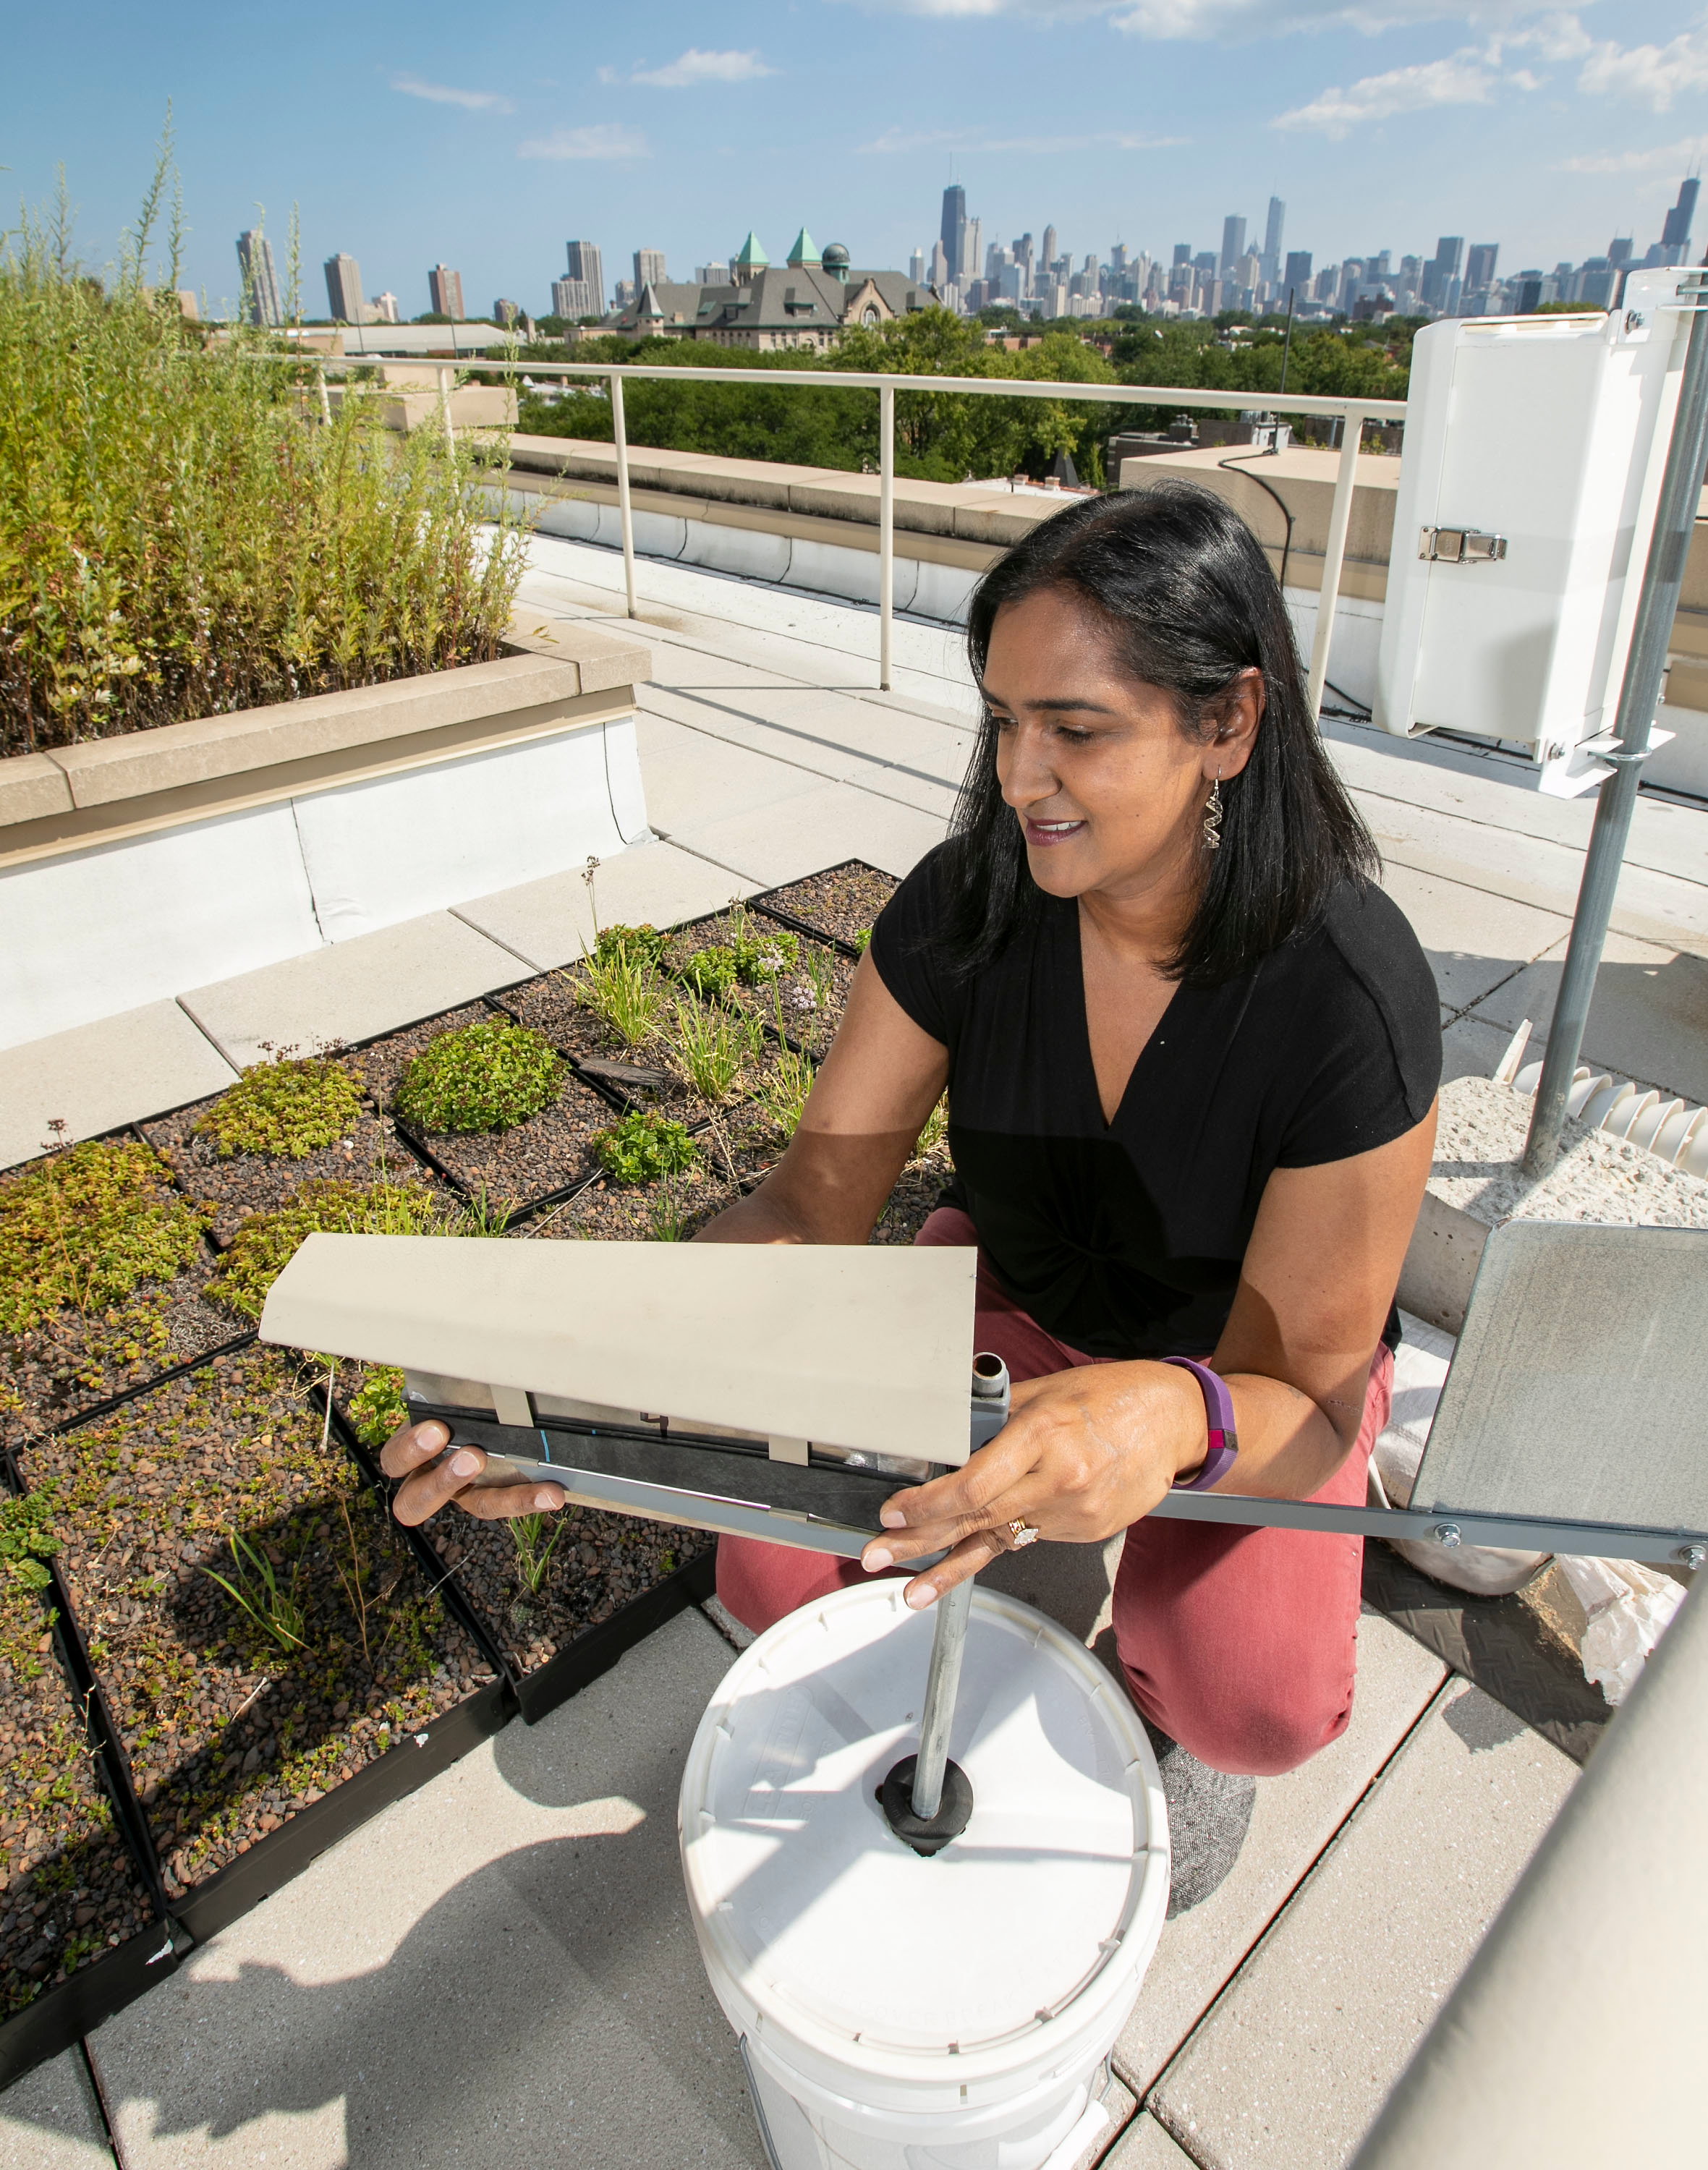 2018 08/22/18 assistant professor, Bala Chaudhary, Department of Environmental Science and Studies, College of science and health, undergraduate research, LPC, lincoln park campus, mcgowan south, greenroof, green roof, urban mycorrhizas, research, pollution, urban garden, ecology, soil, data analysis, environmental science ©2018 DePaul University